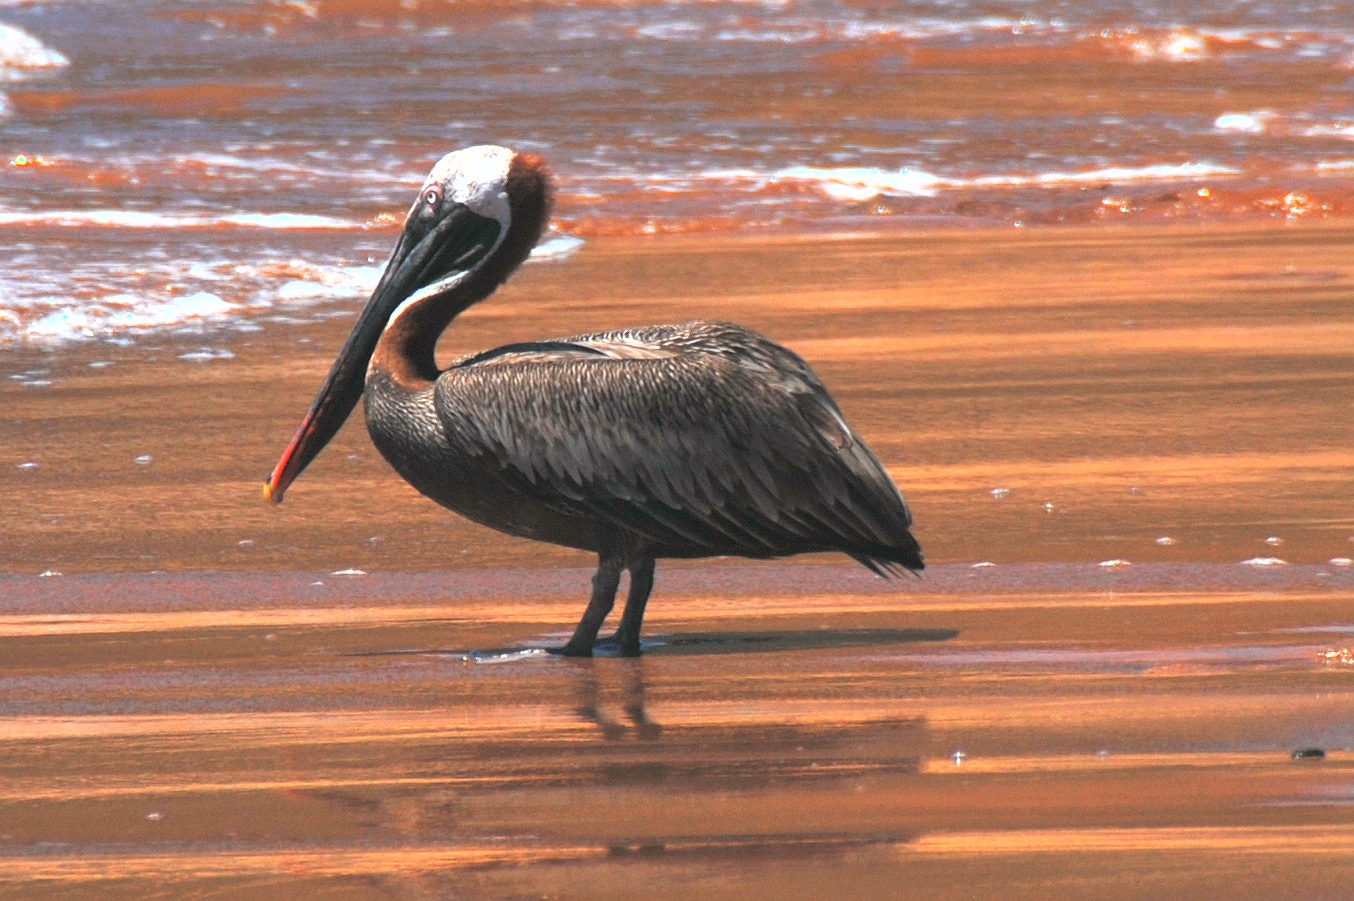 Click picture to see more Brown Pelicans.